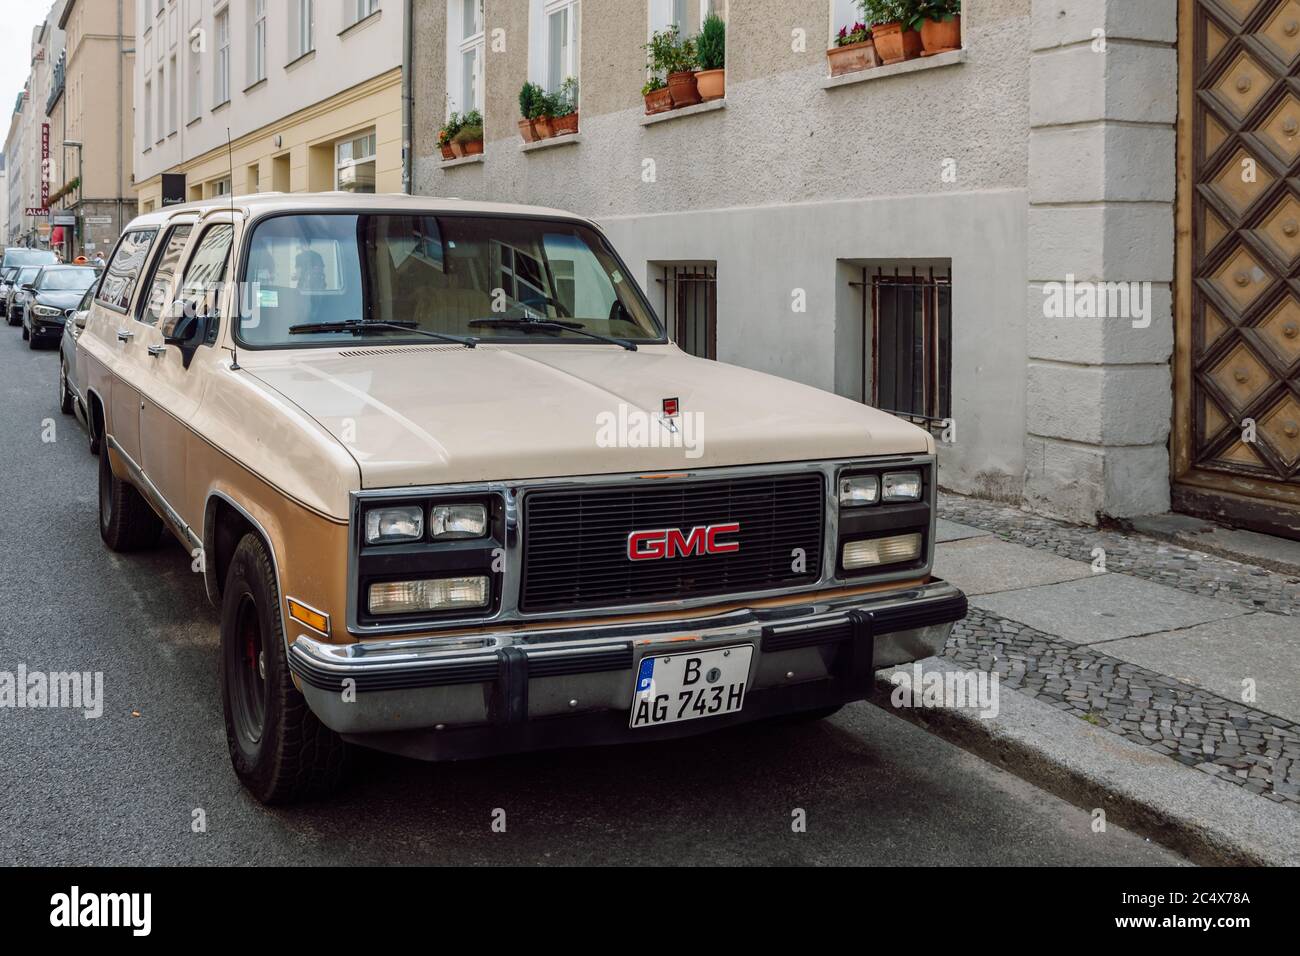 GMC Suburban Seventh generation. Classic American full-size SUV. It is traditionally one of General Motors' most profitable vehicles. Stock Photo